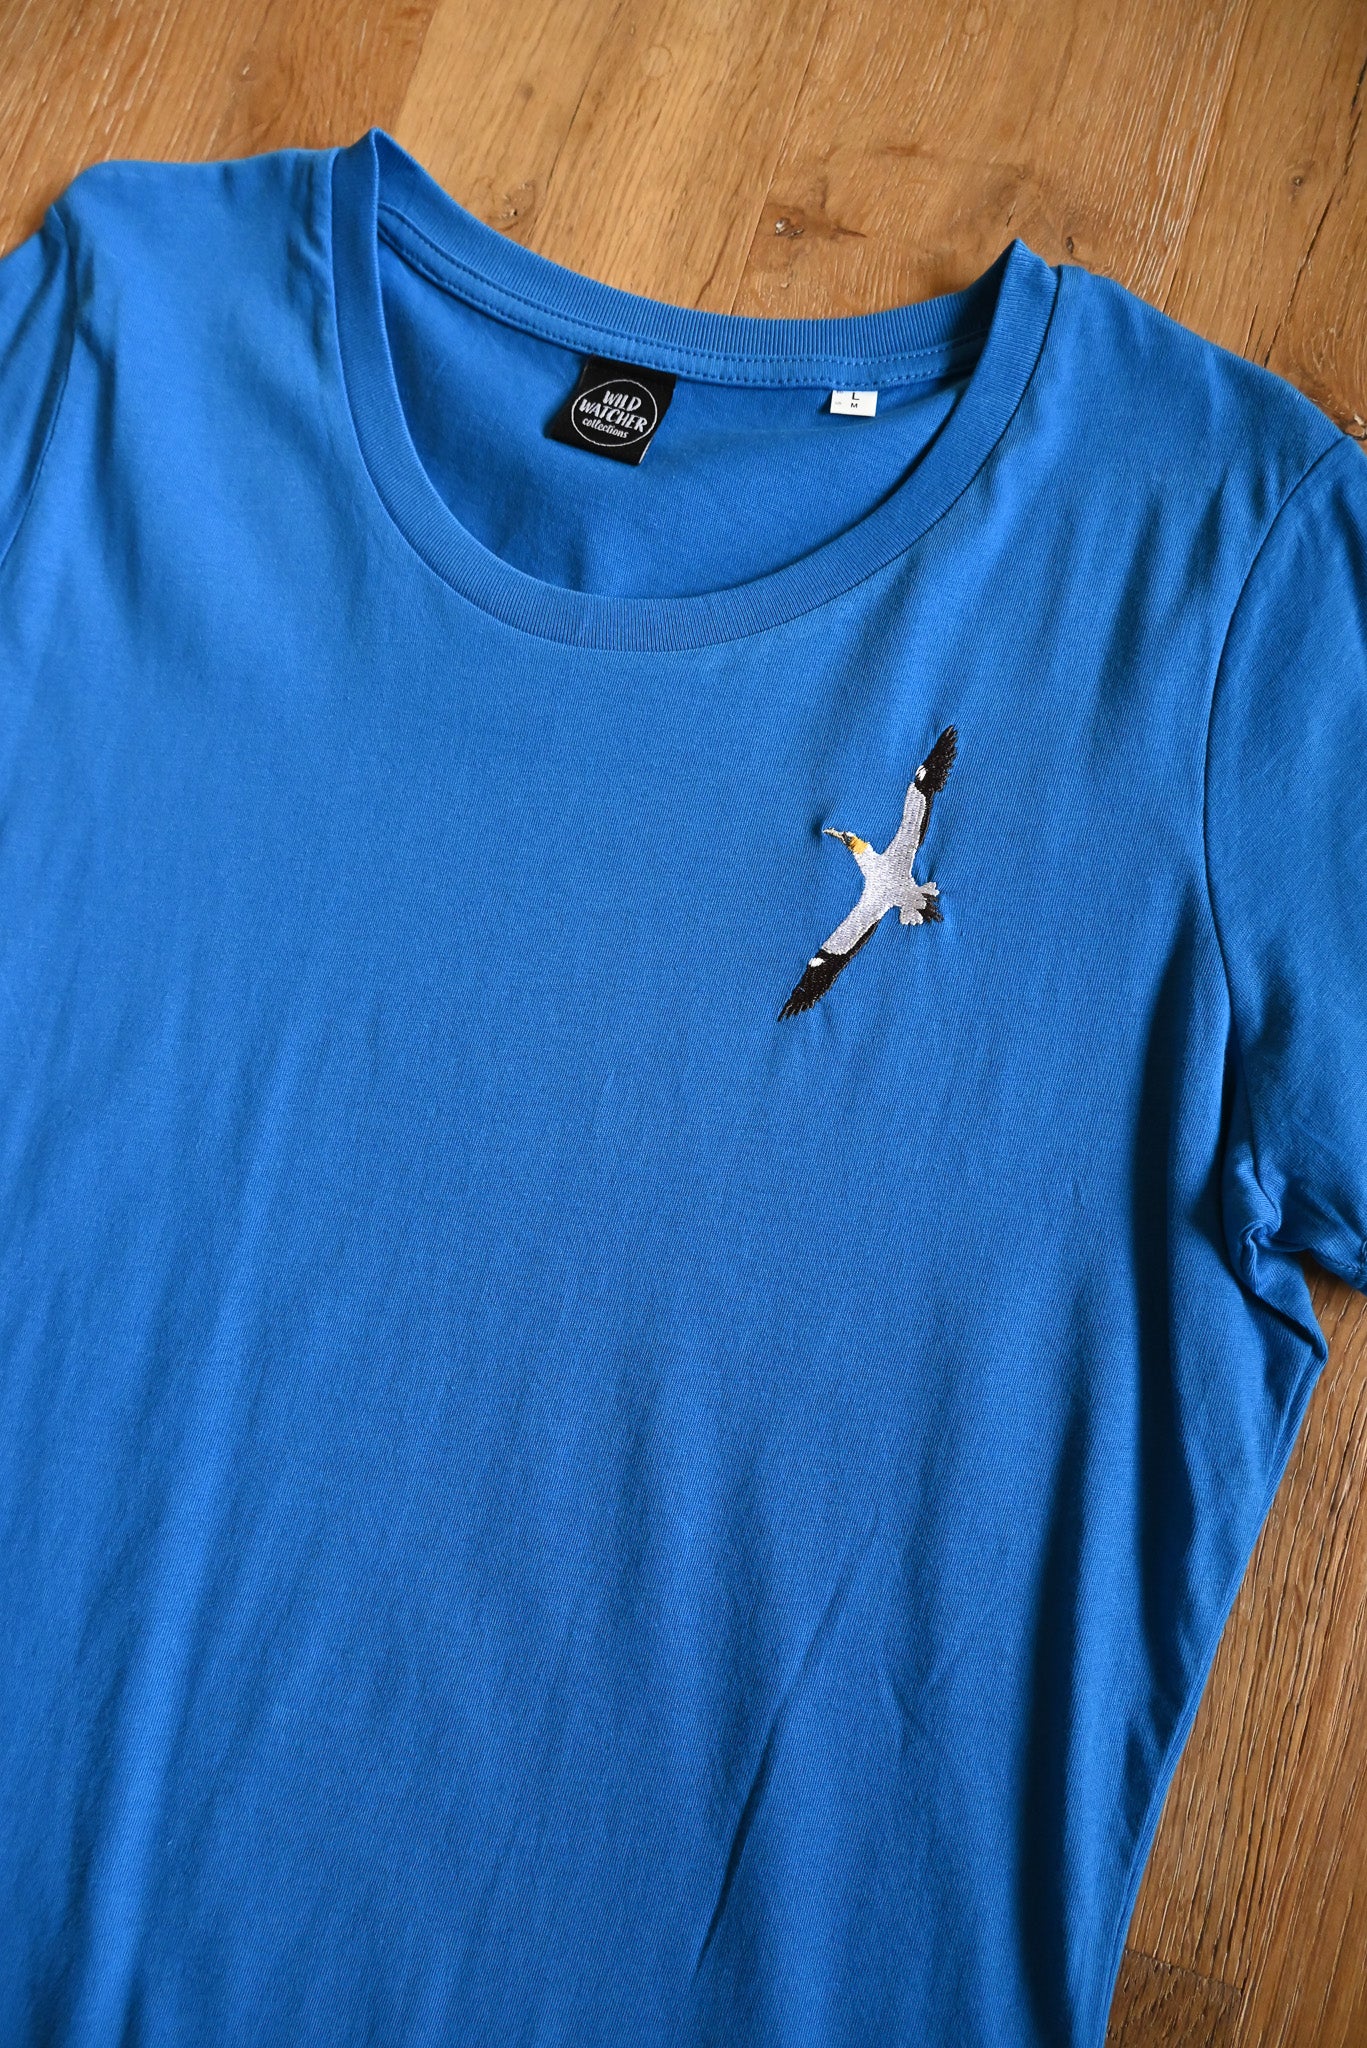 SIZE L UK 14-16 Ladies Fitted Flying Gannet Embroidered Organic Cotton T-shirt